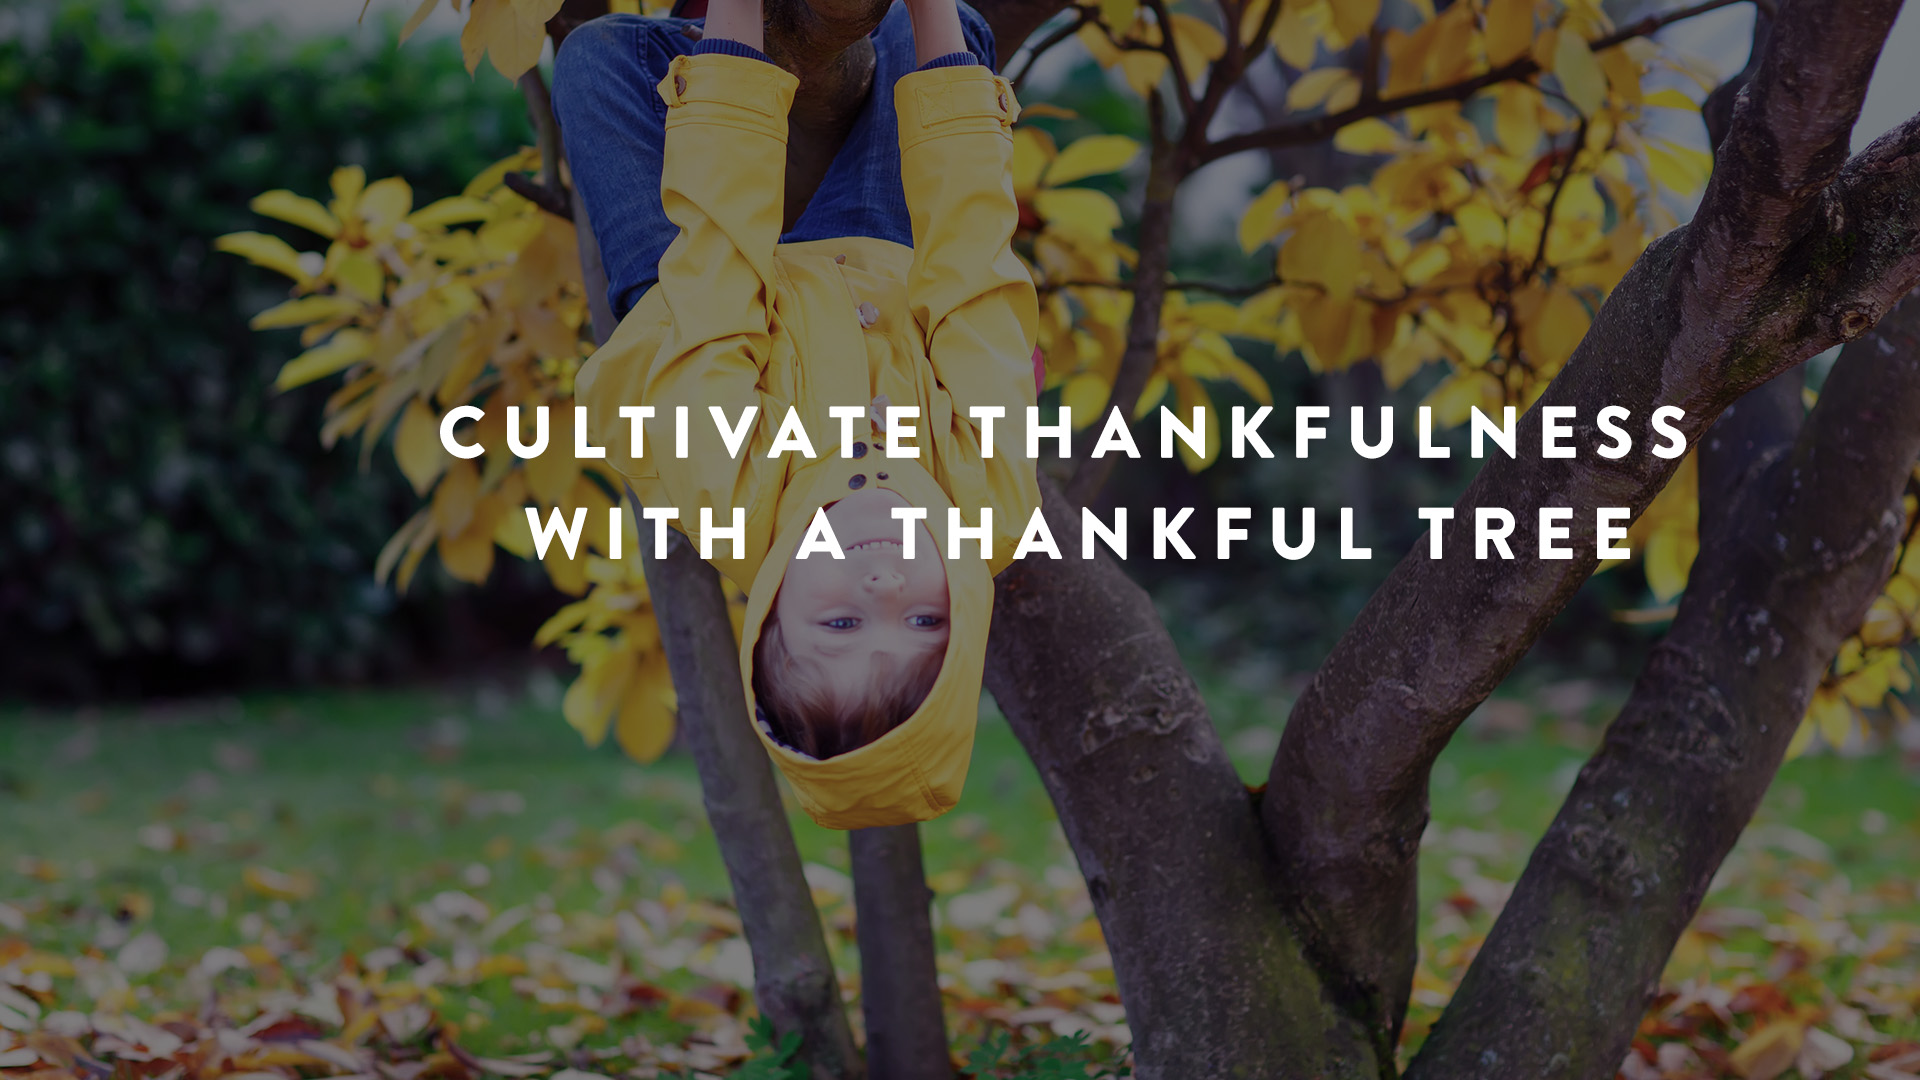 Cultivating Thankfulness with a thankful tree